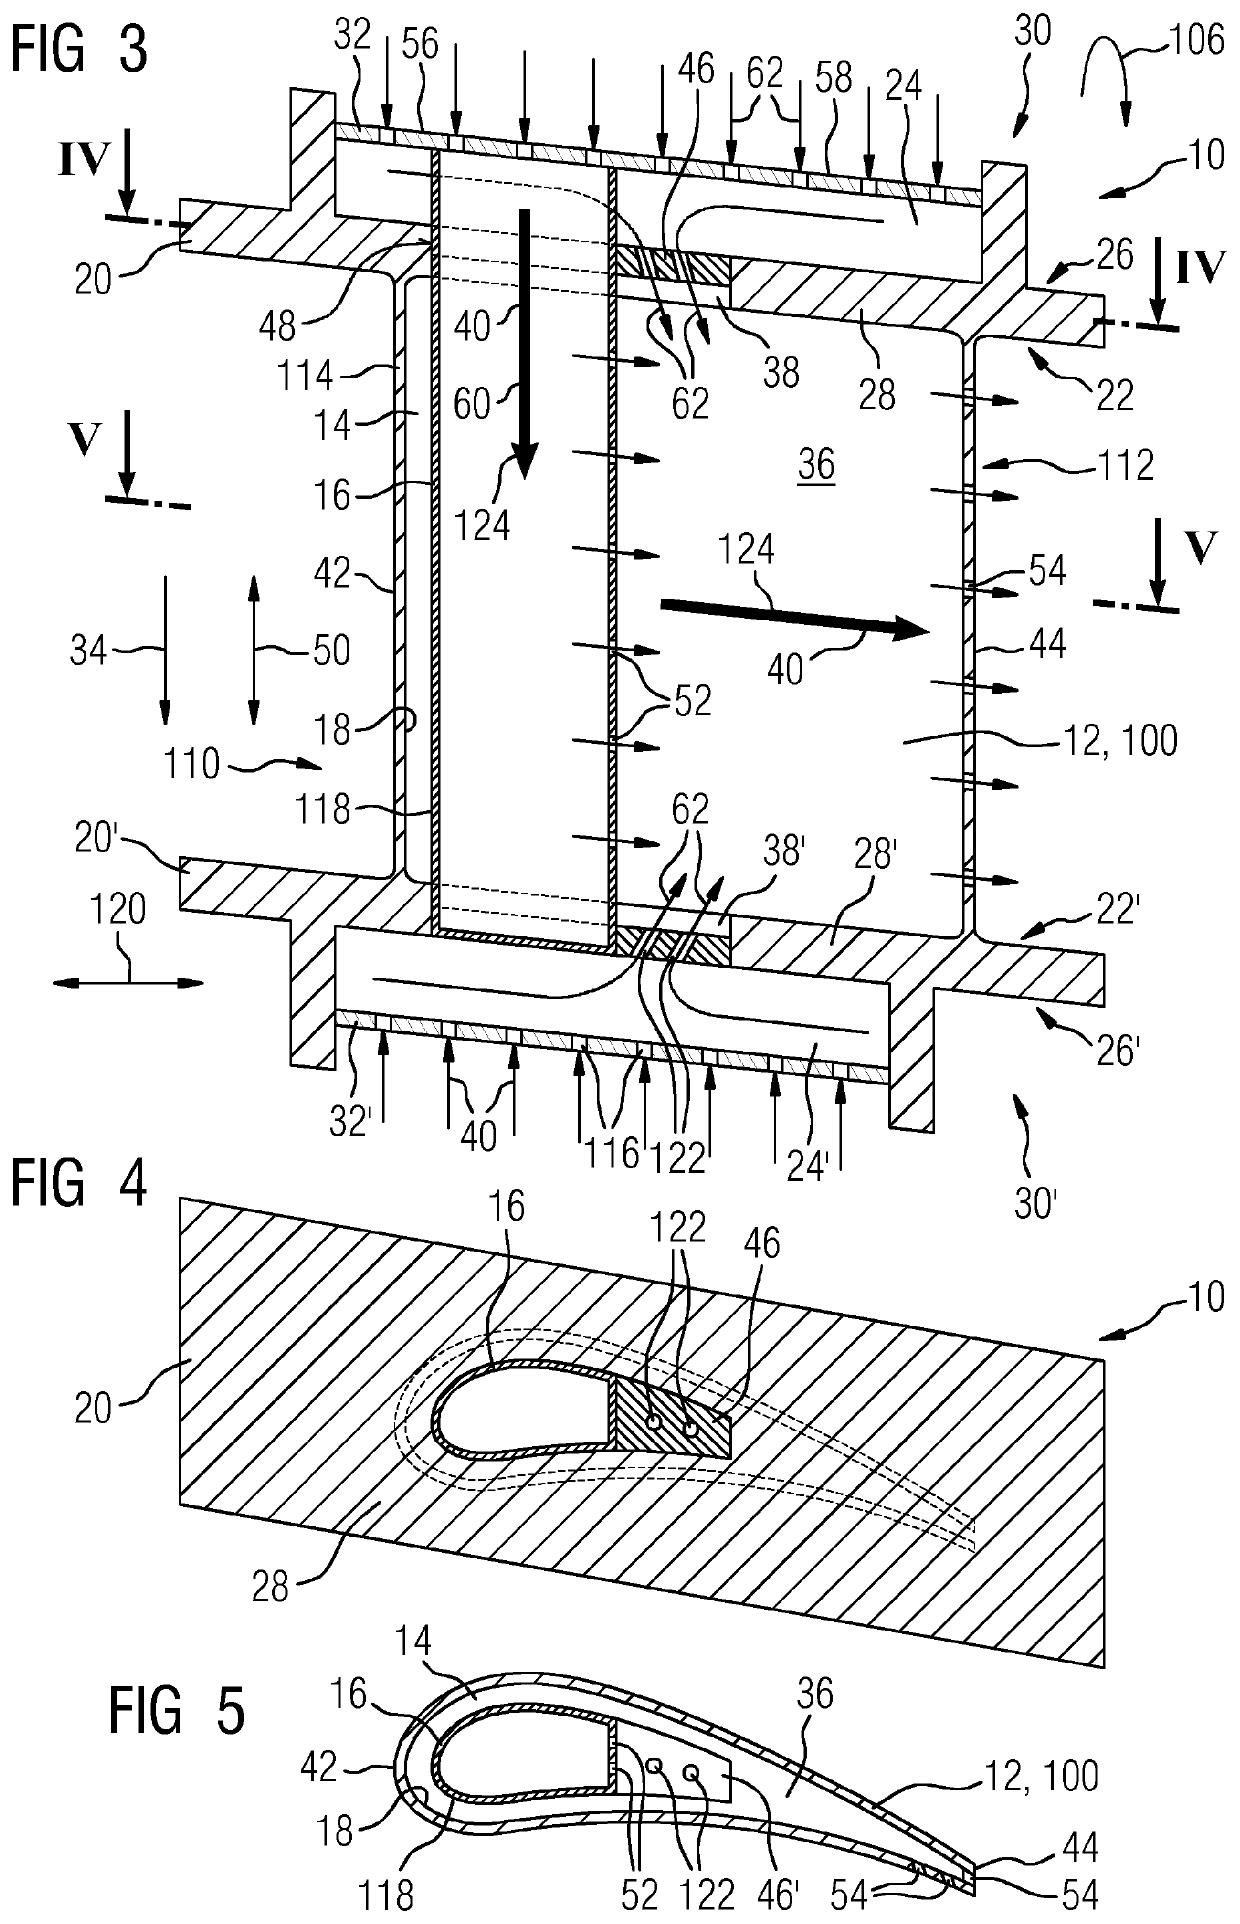 Cooling concept for turbine blades or vanes